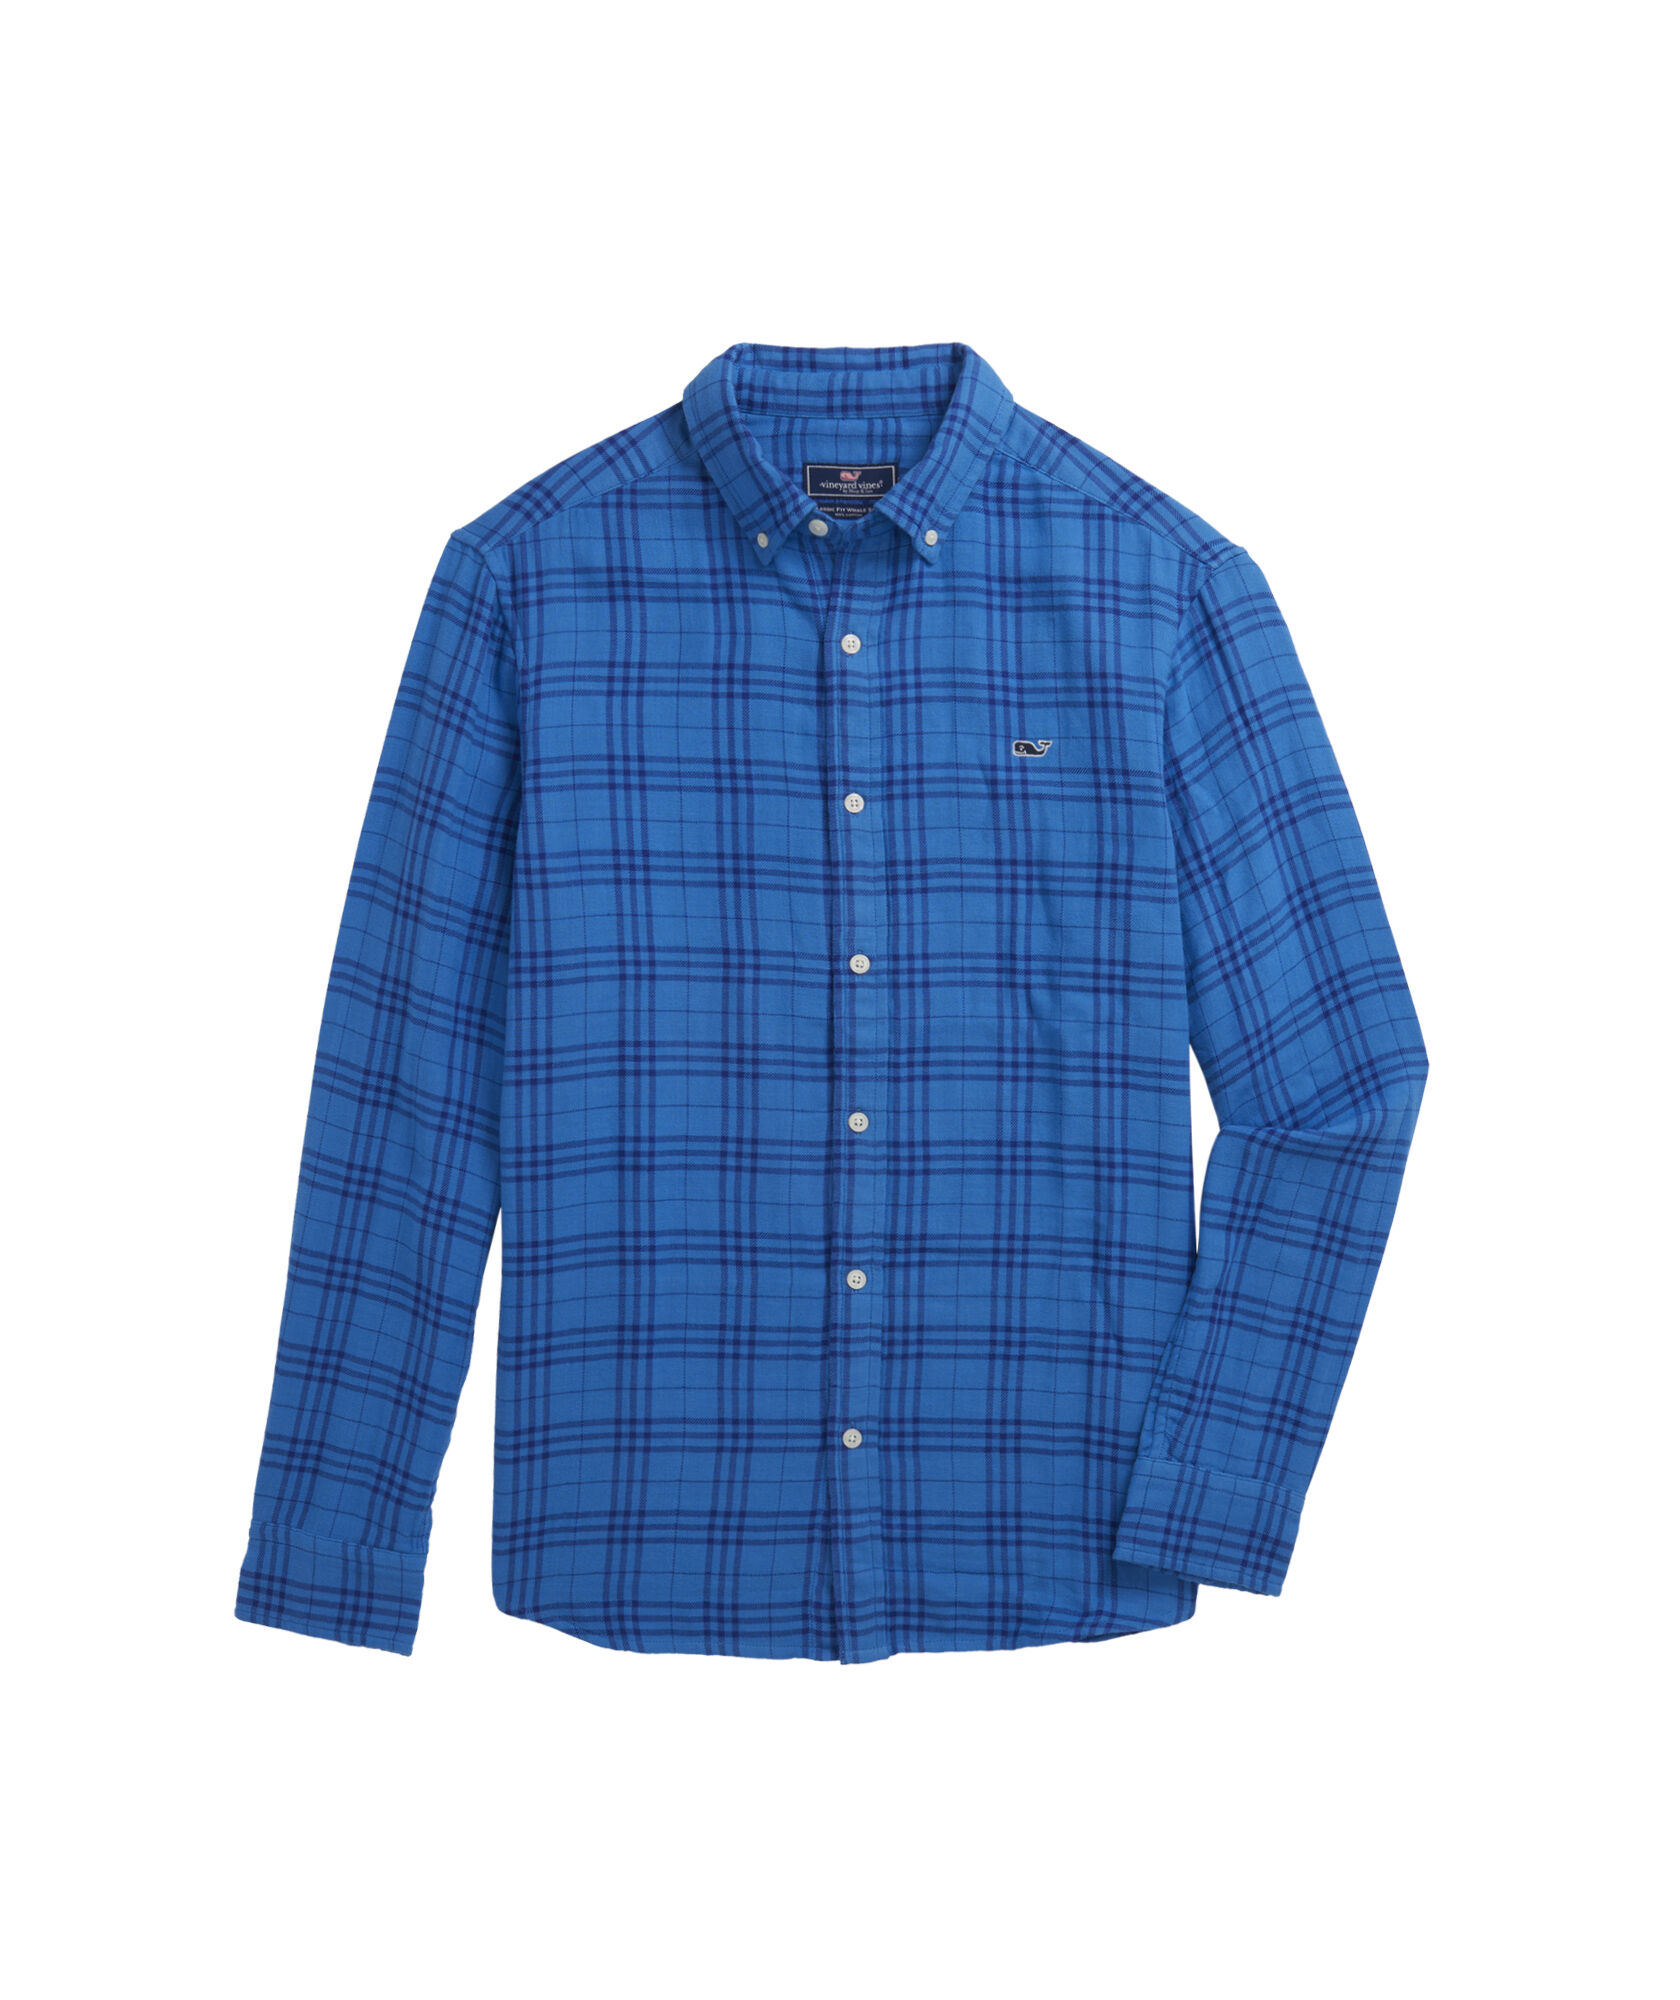 OUTLET Double Cloth Check Shirt